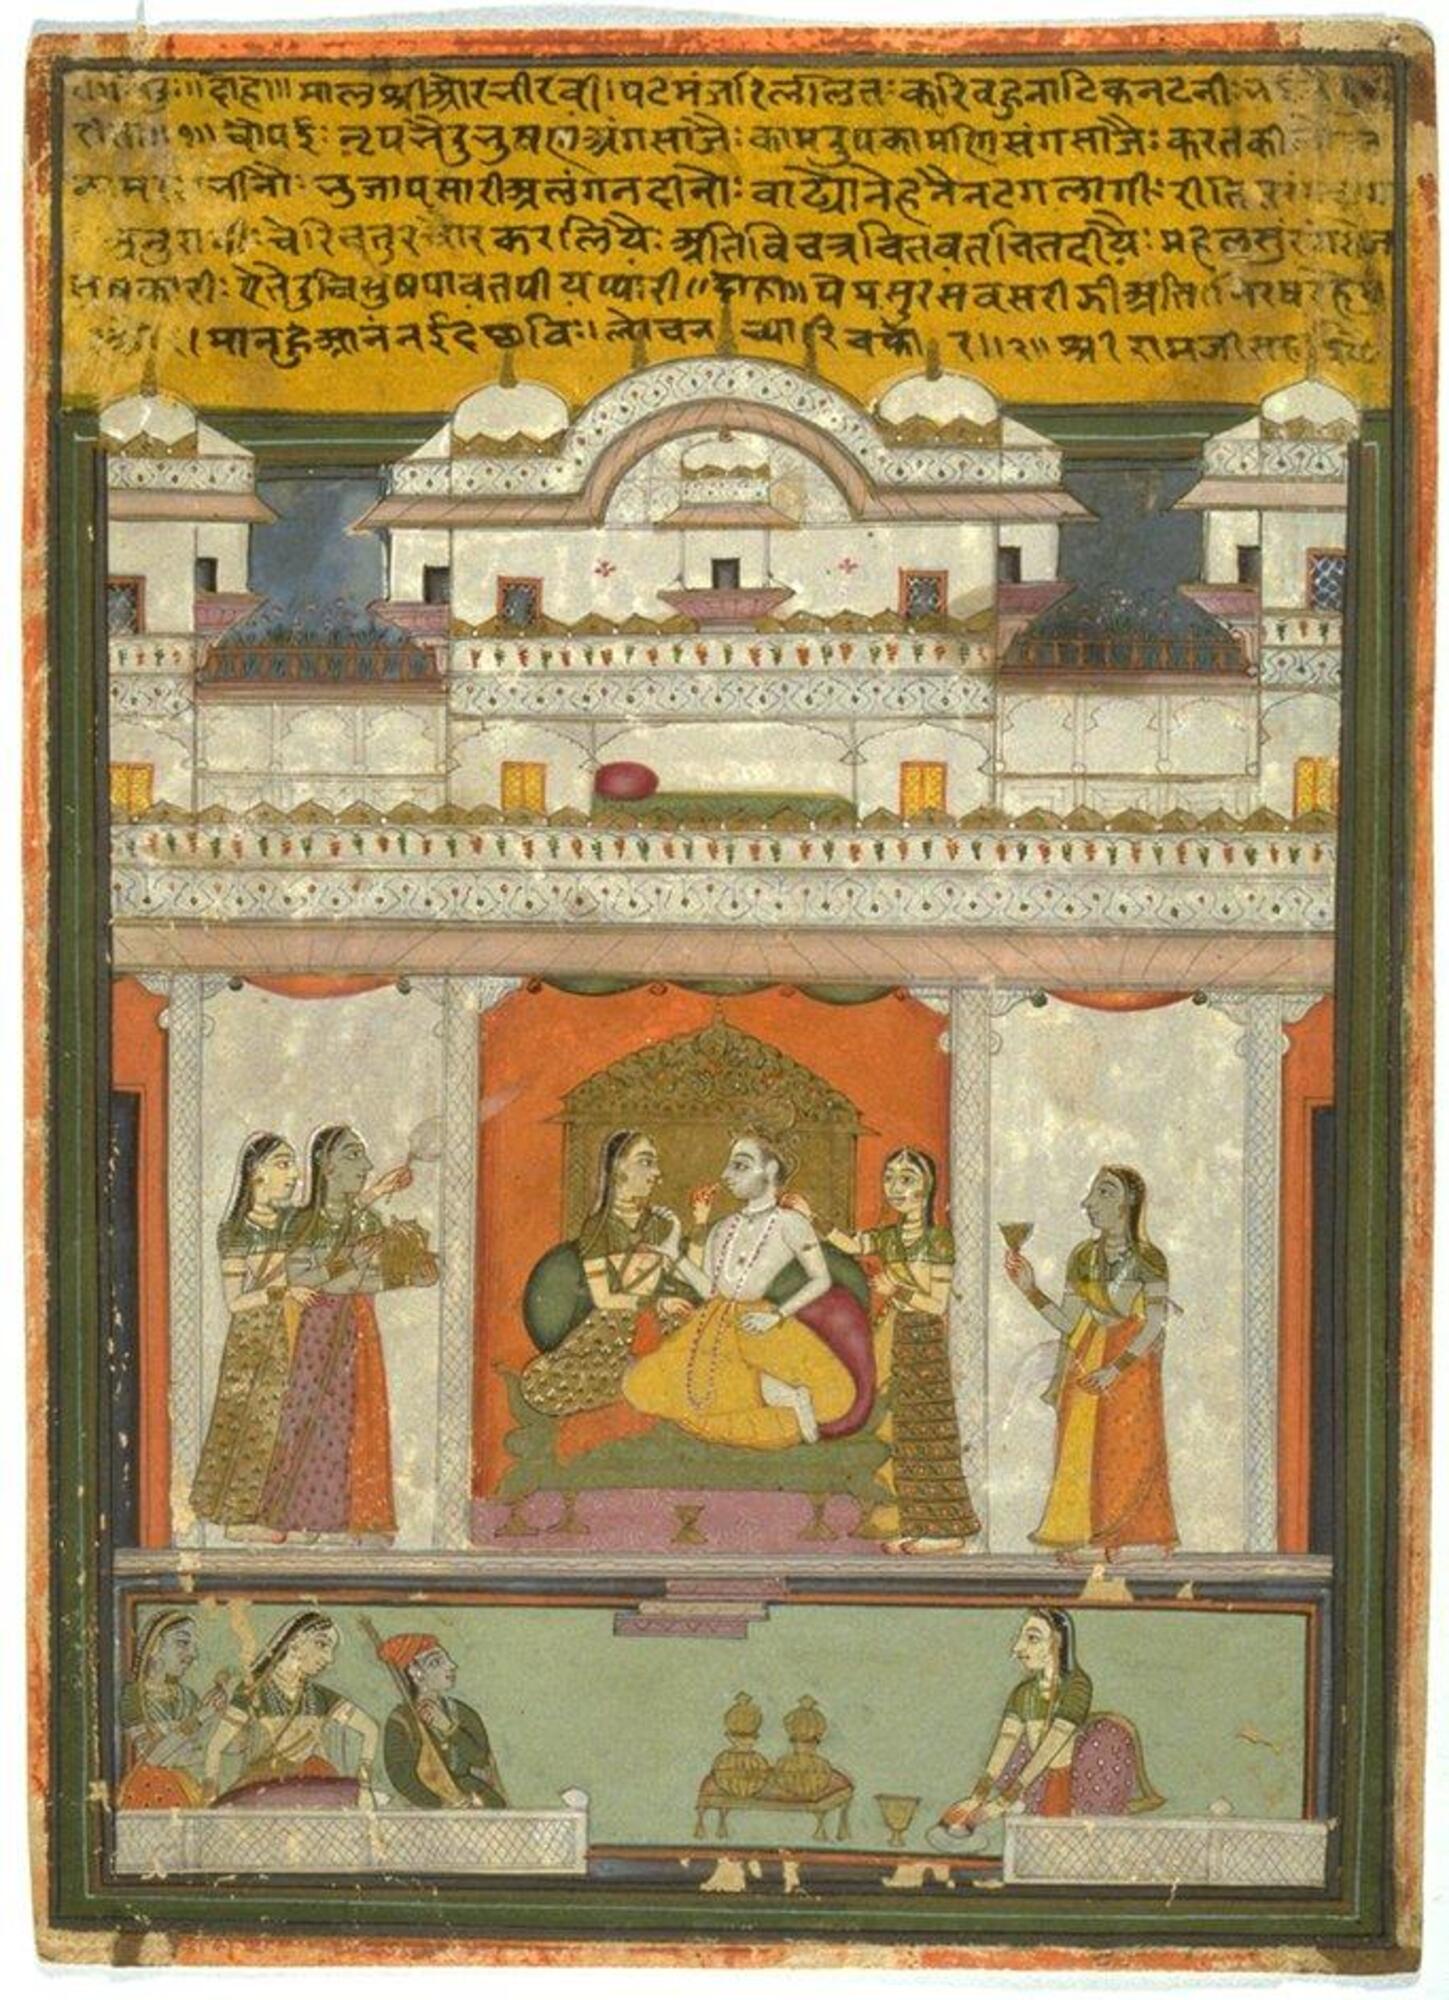 A male figure, seated in a palace chamber, is surrounded by five adoring females. One of them sits on the same throne as the male figure, and feeds him a betel leaf, as he holds her arm. The other females carry various objects in their hands. On the left, one holds a fly whisk, the other a box/basket-like object. On the right, a woman holds a chalice. Musicians and attendants are depicted in the lower register, where they squat and look in the direction of the scene shown above. The palace exterior is rendered in exquisite detail.